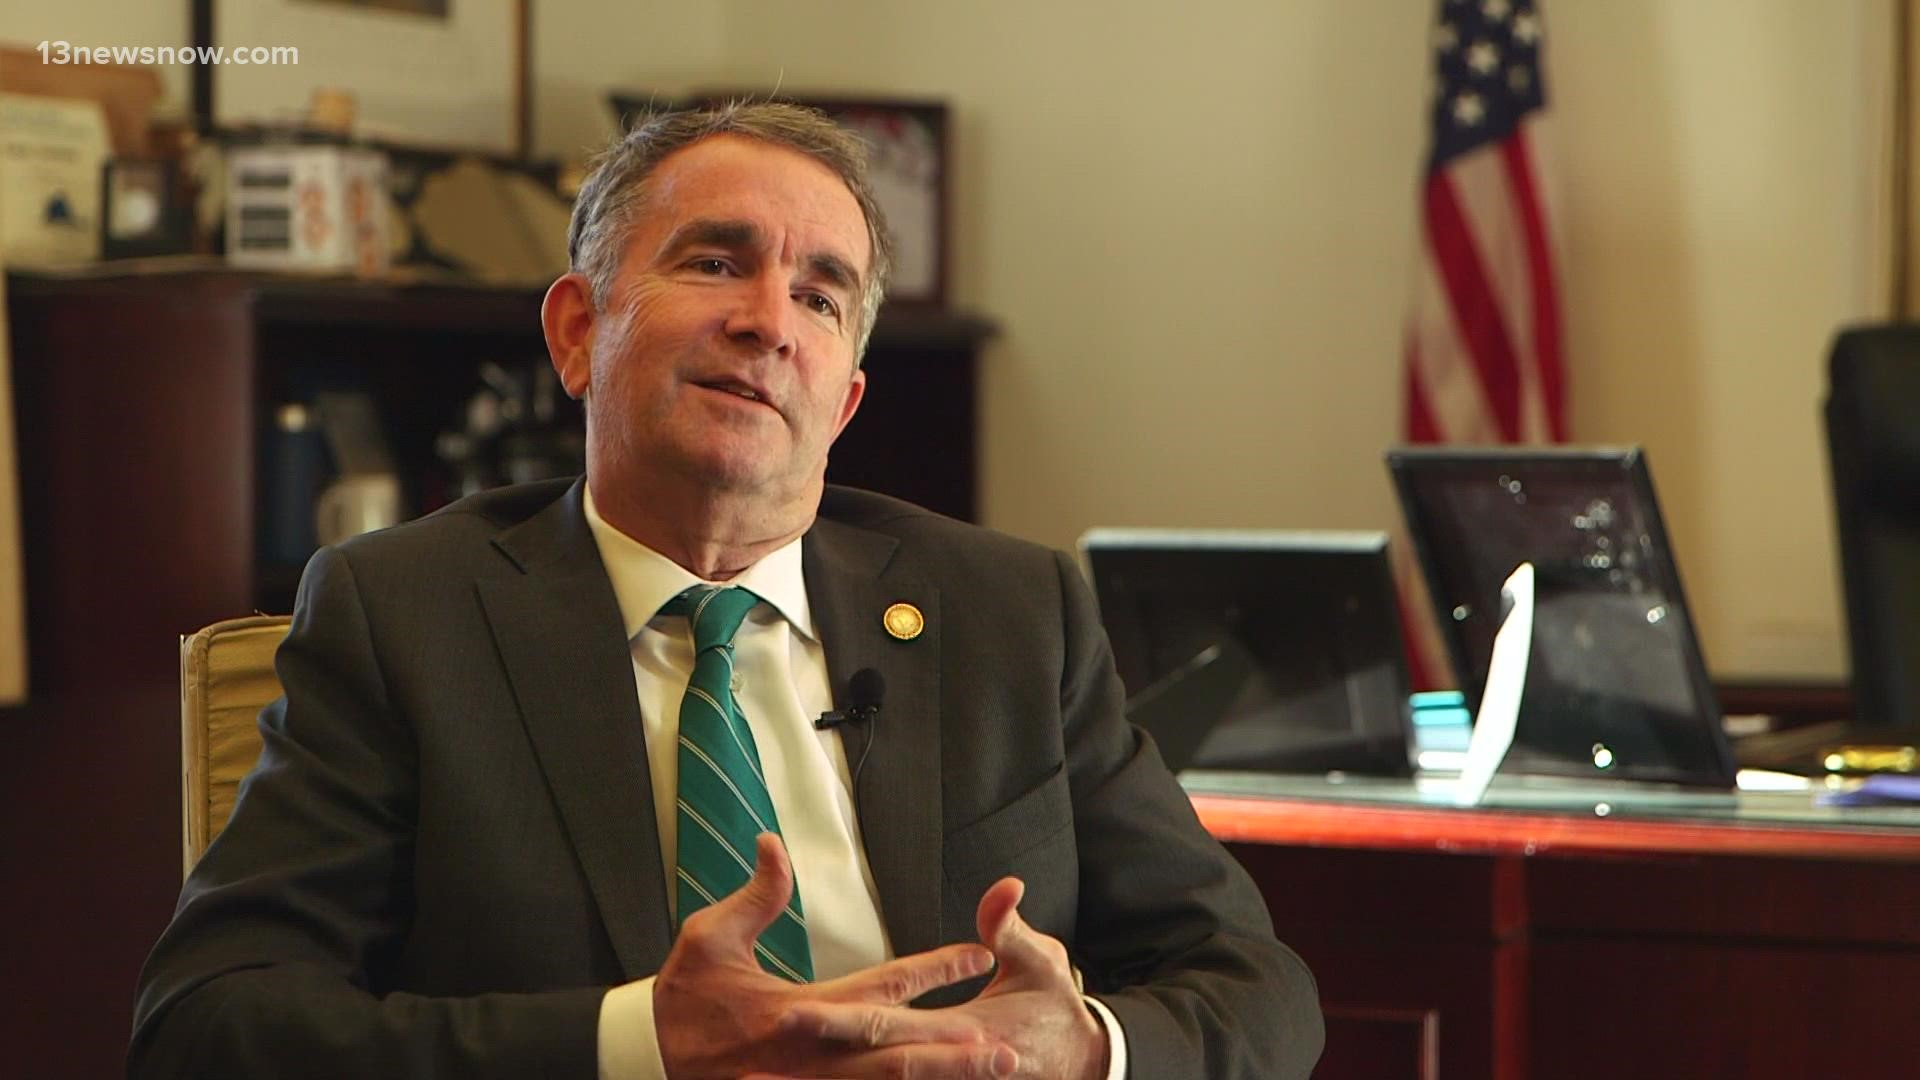 Despite a bruising defeat for Democrats in November, Governor Northam says the future of his party is bright.